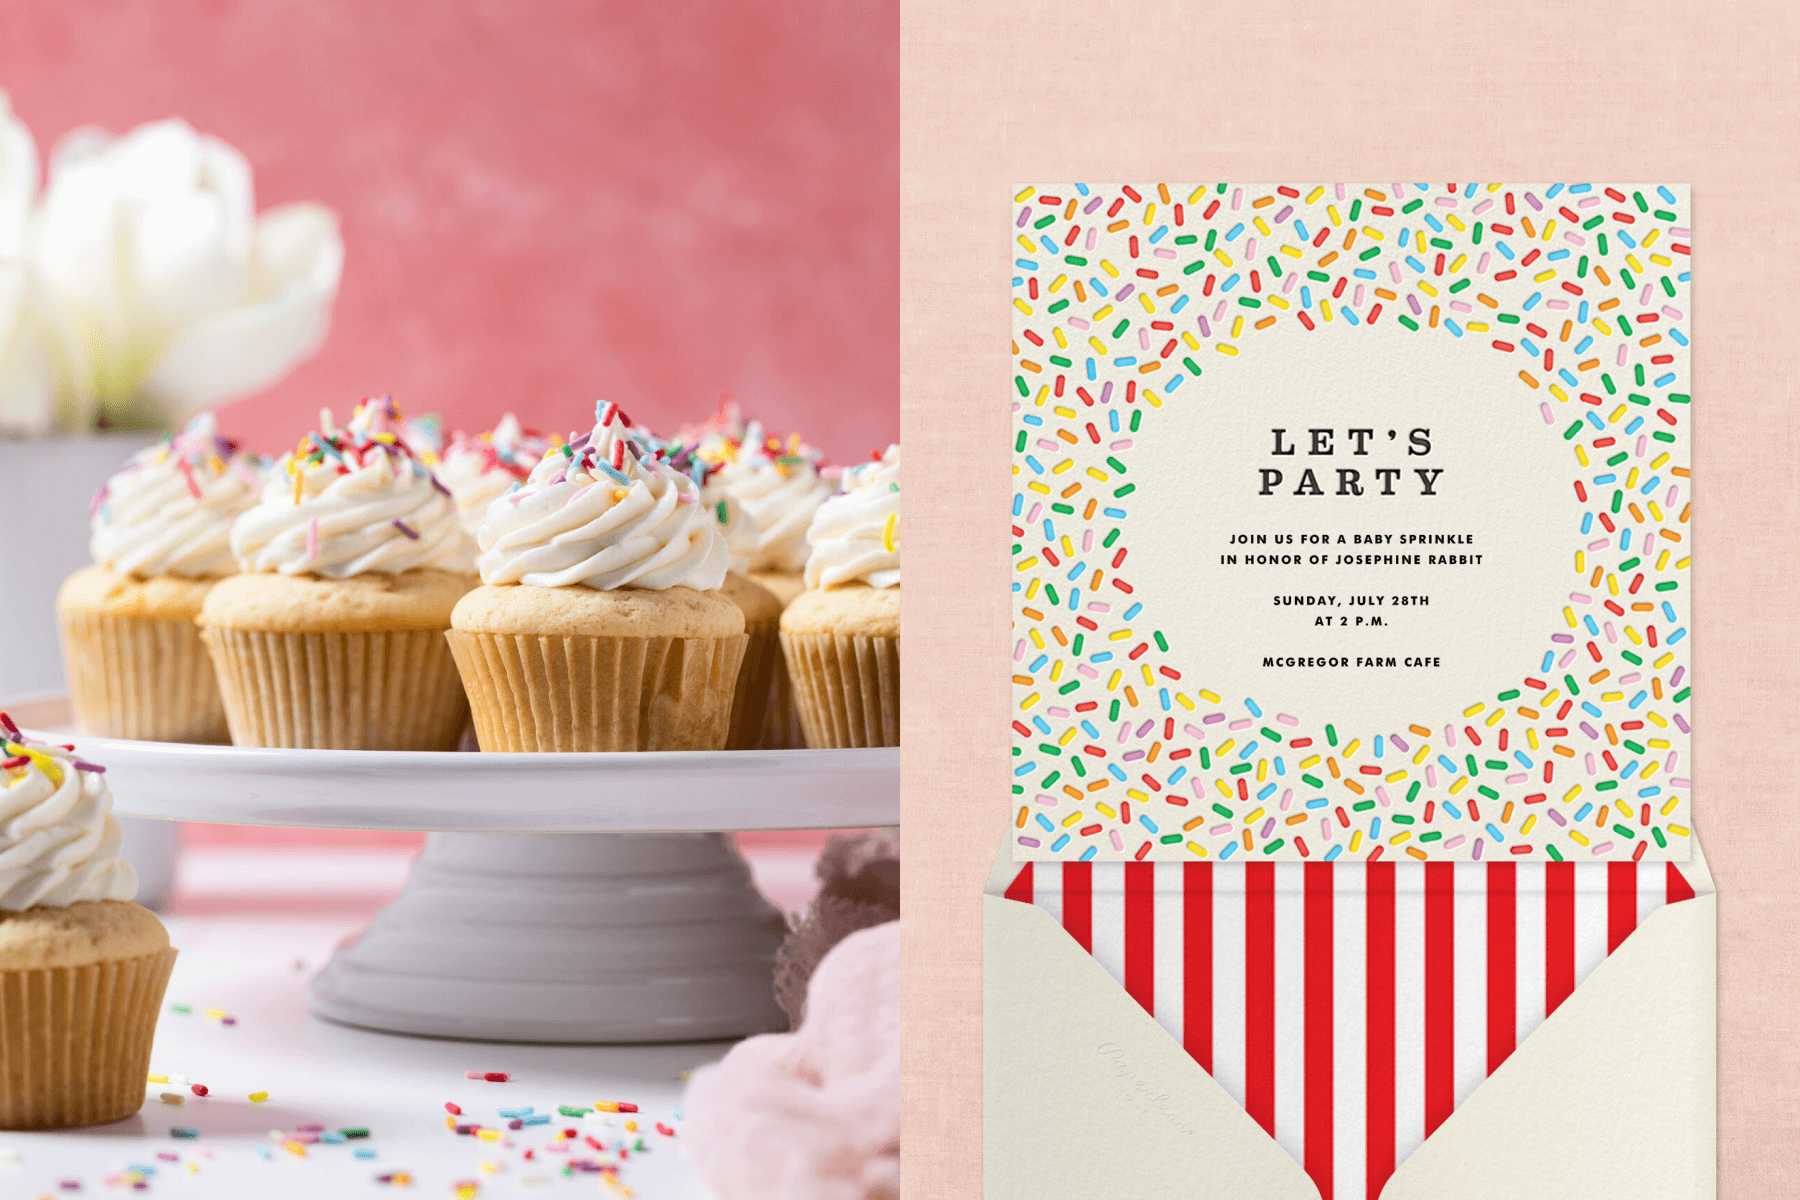 Left: Vanilla cupcakes with white frosting and rainbow sprinkles sit on a cake stand. Right: A baby sprinkle invitation with a wide border or rainbow sprinkles coming out of a cream envelope with red and white stripe liner.